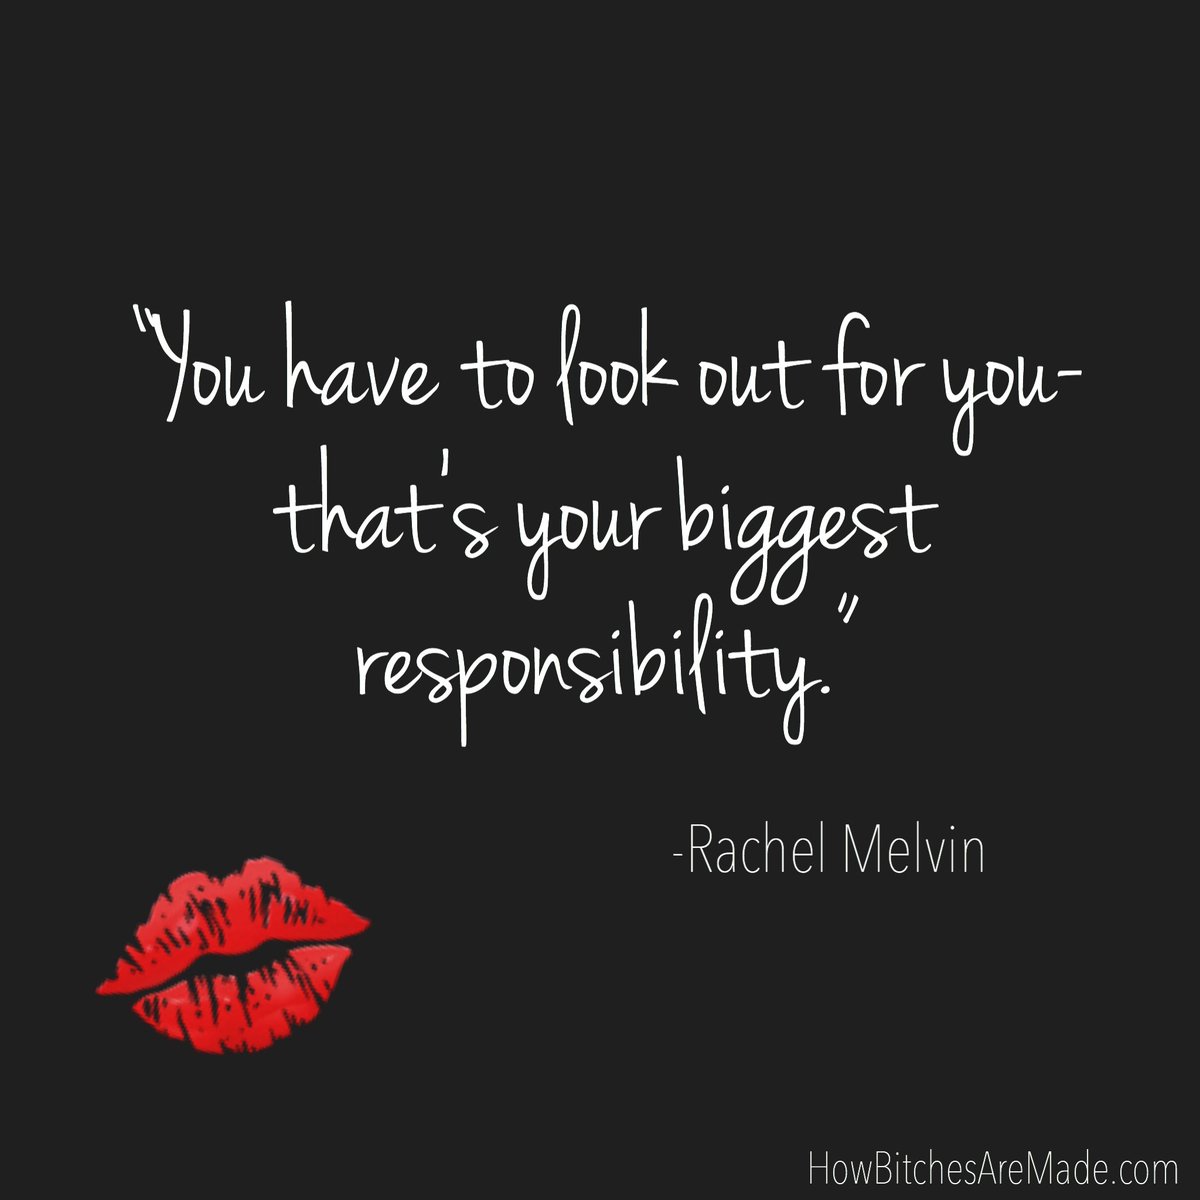 One of the hardest things for this #bitch to relearn. Who else struggles with prioritizing themselves? #howbitchesaremade #hbampodcast #selfhelp #selfcare #feminist #femaleempowerment #thursdaythoughts